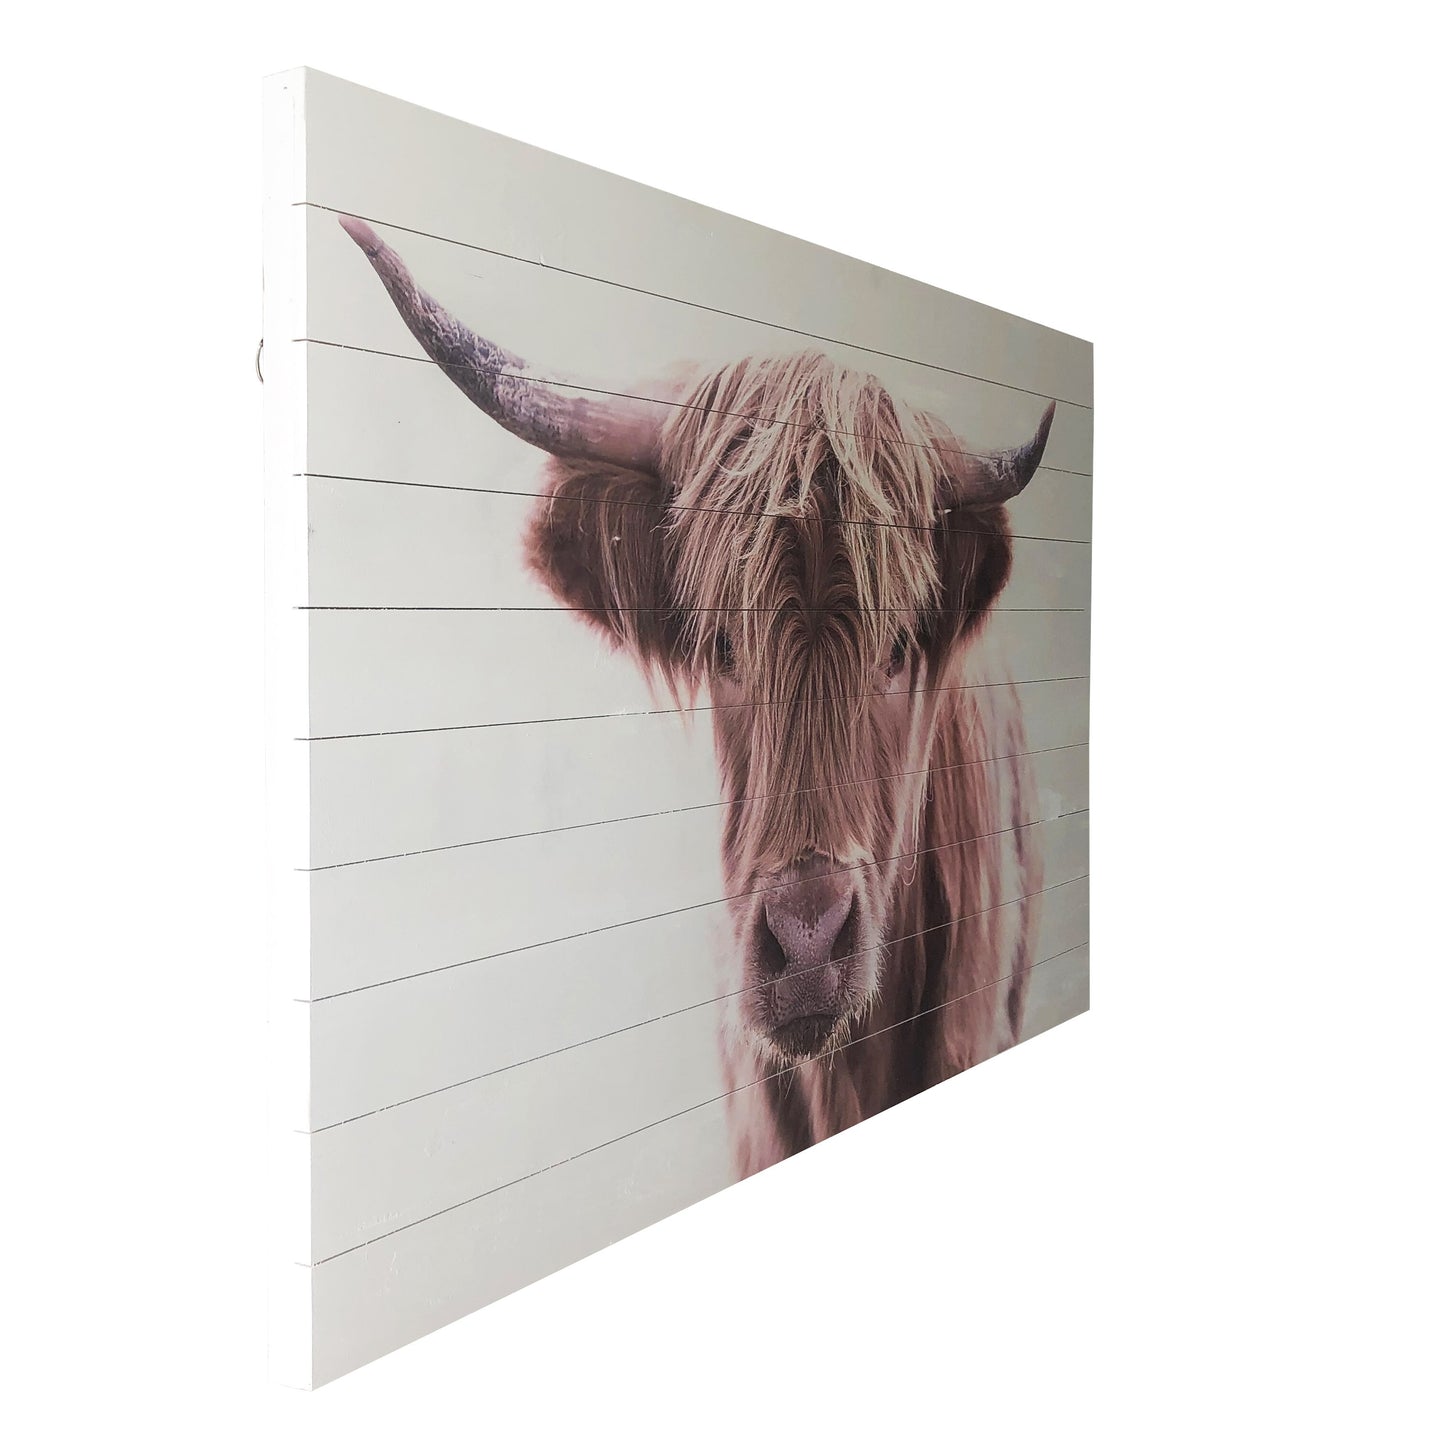 Adorable Brown Highland Cow Wood Plank Wall Art